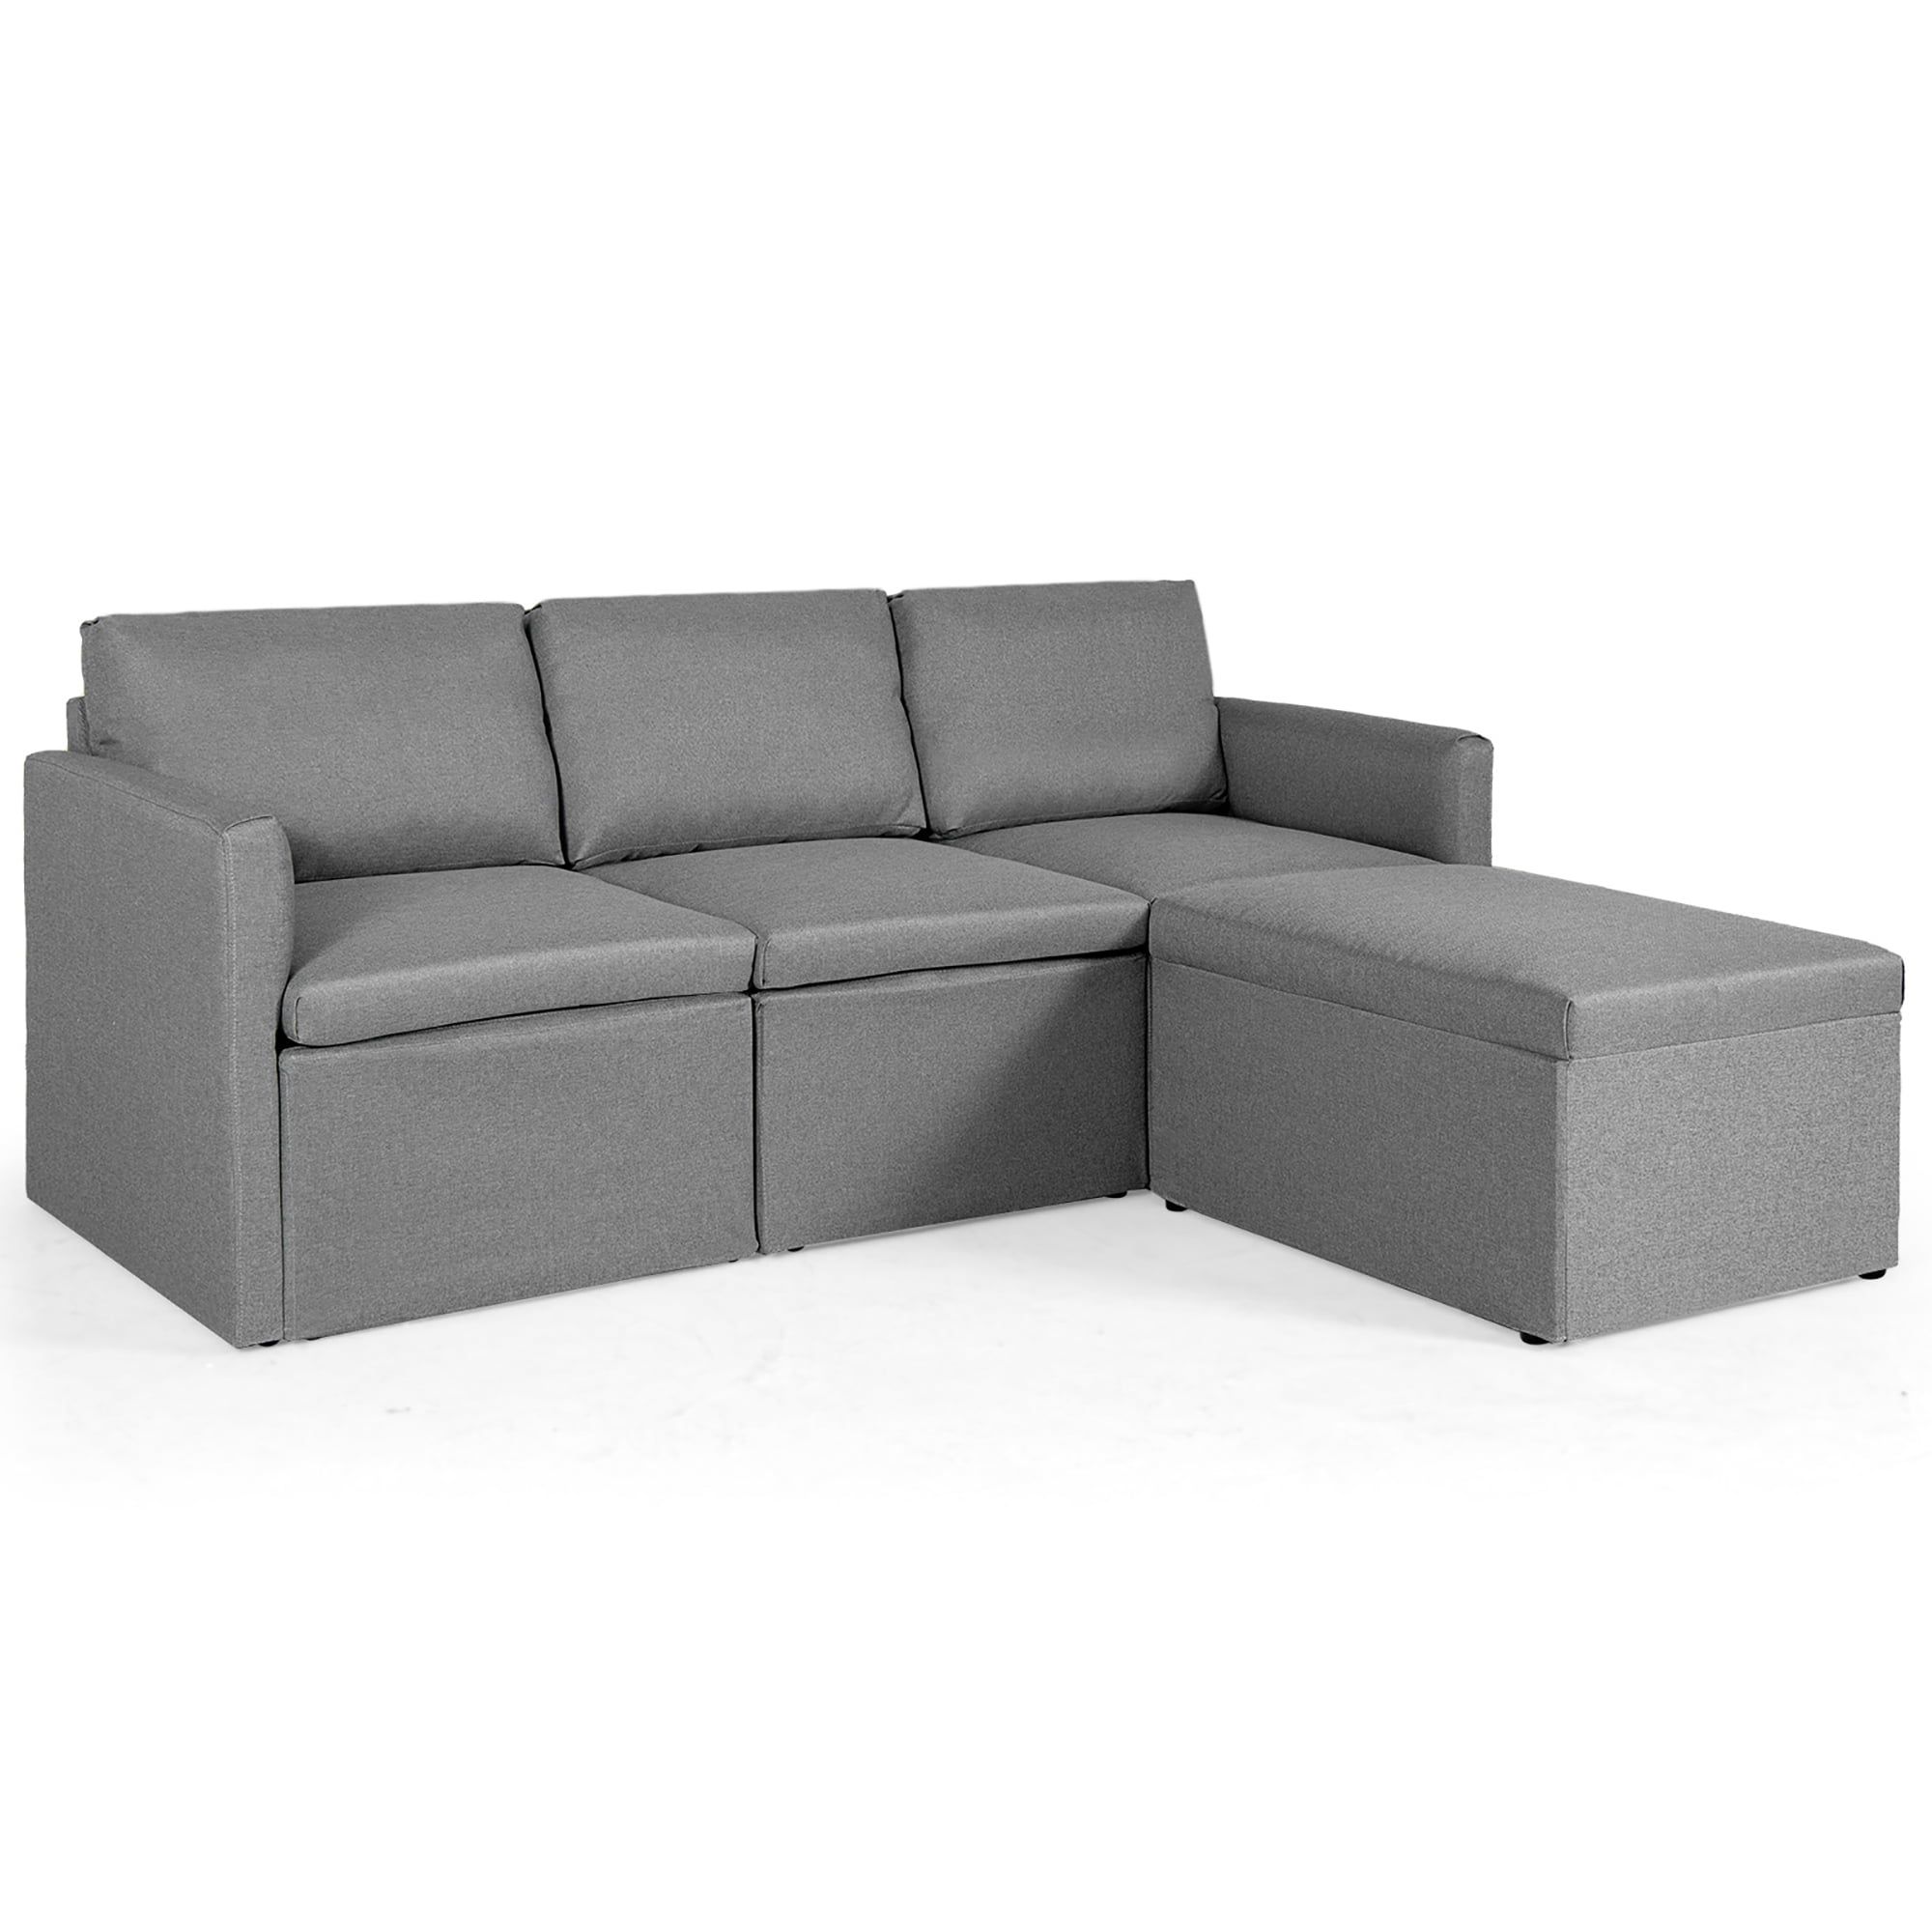 Costway Convertible Sectional Sofa L Shaped Couch W/reversible Chaise With L Shape Couches With Reversible Chaises (View 19 of 20)